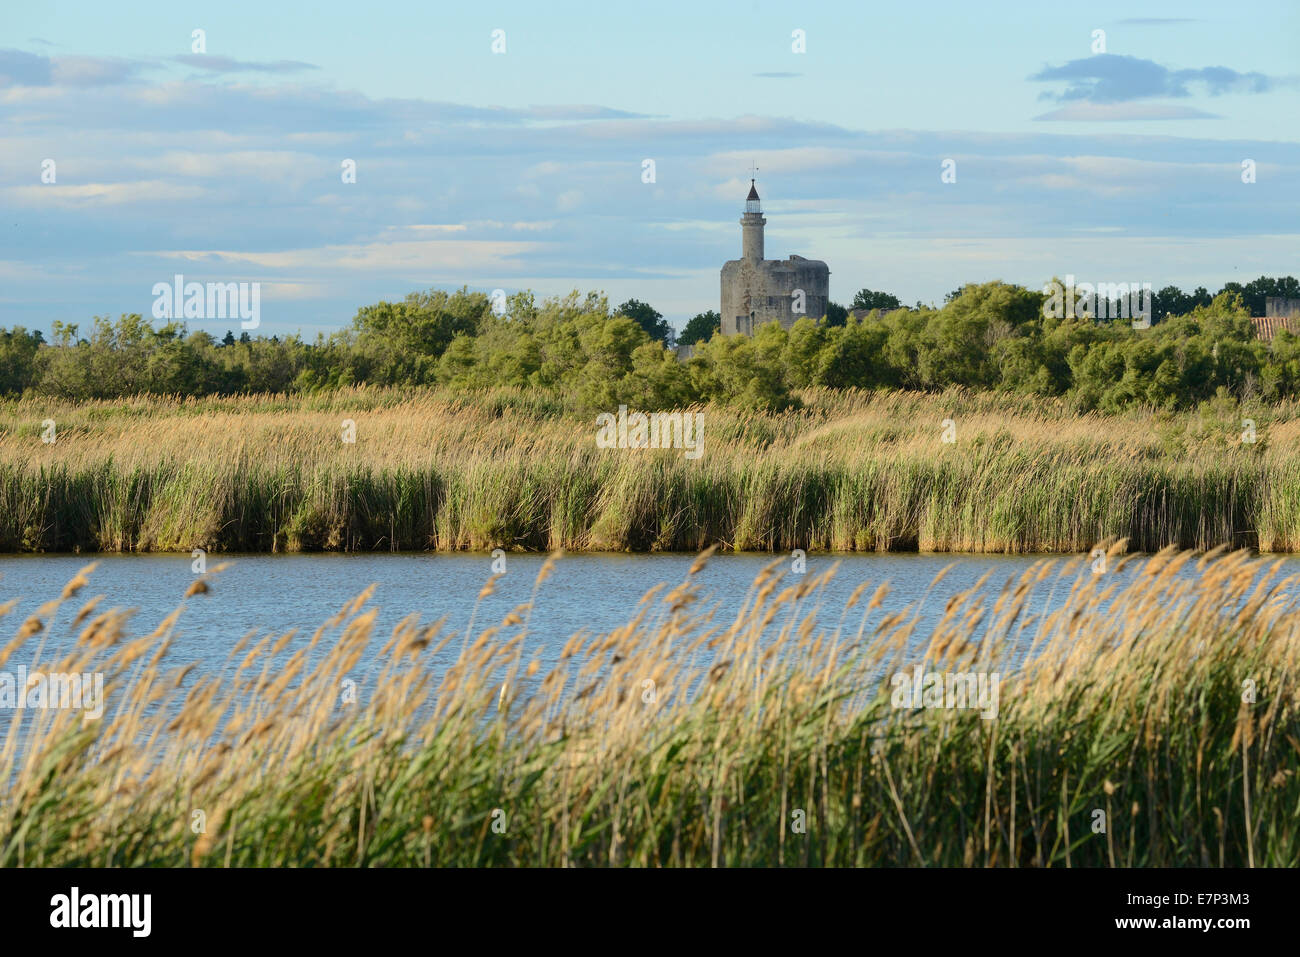 Europe, France, Languedoc- Roussillon, Camargue, Aigues-Mortes, walled, city, medieval, tower, wetland Stock Photo